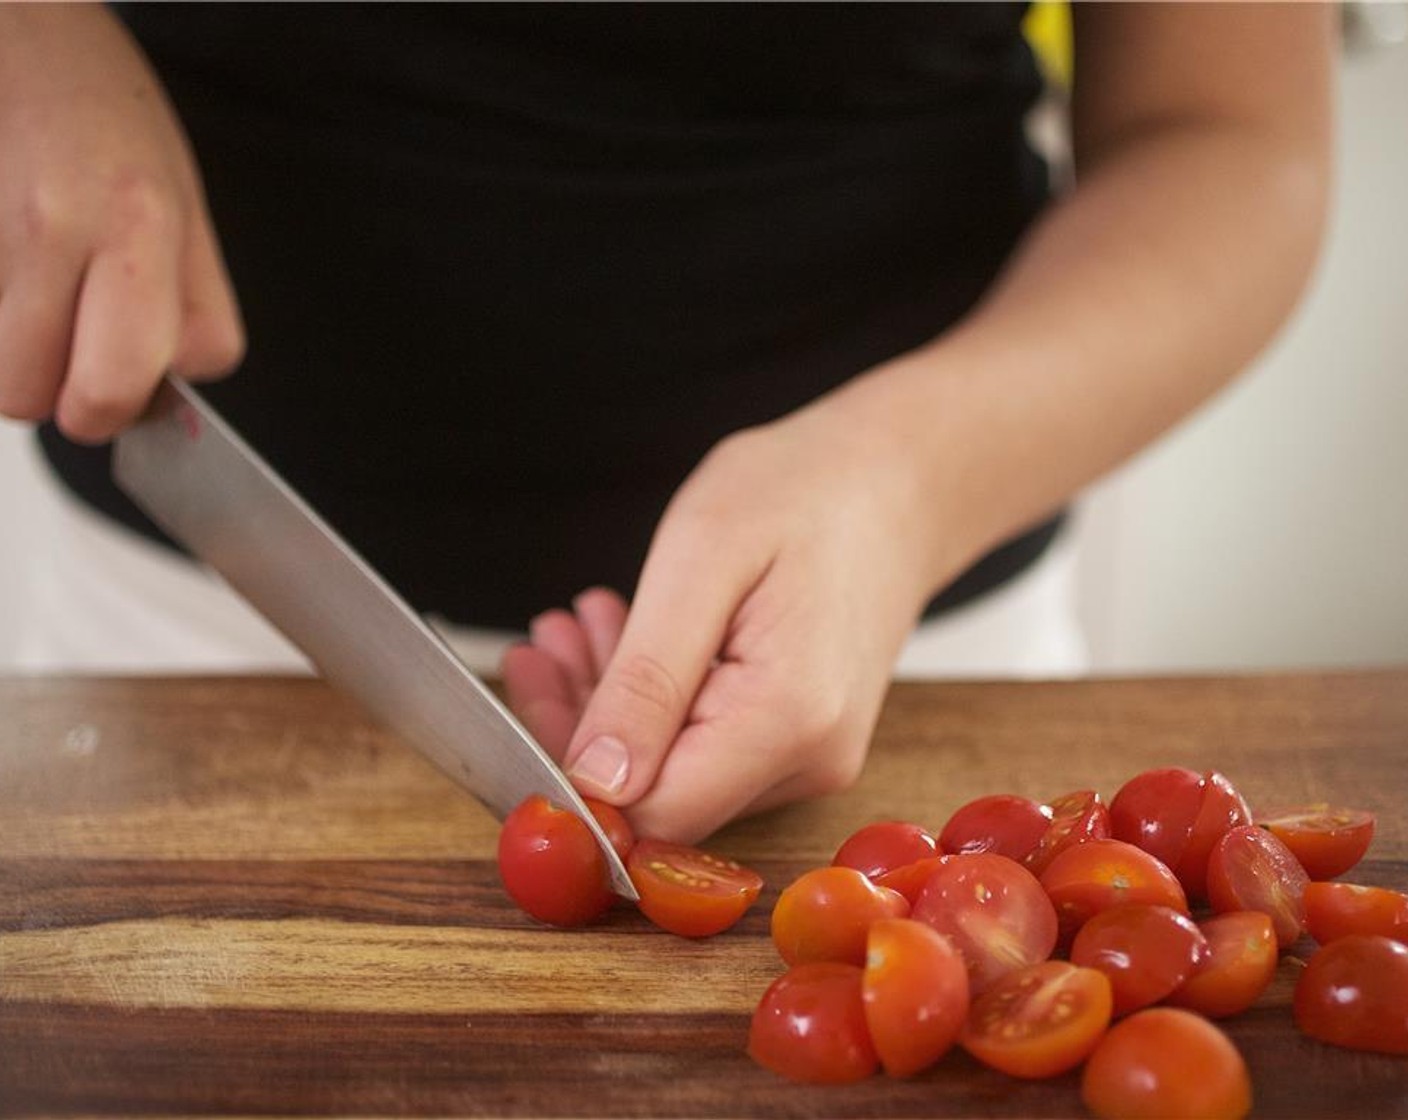 step 1 Cut Cherry Tomato (1 cup) in half lengthwise. Slice Radish (1 bunch) into 1/4 inch rounds. Zest orange.